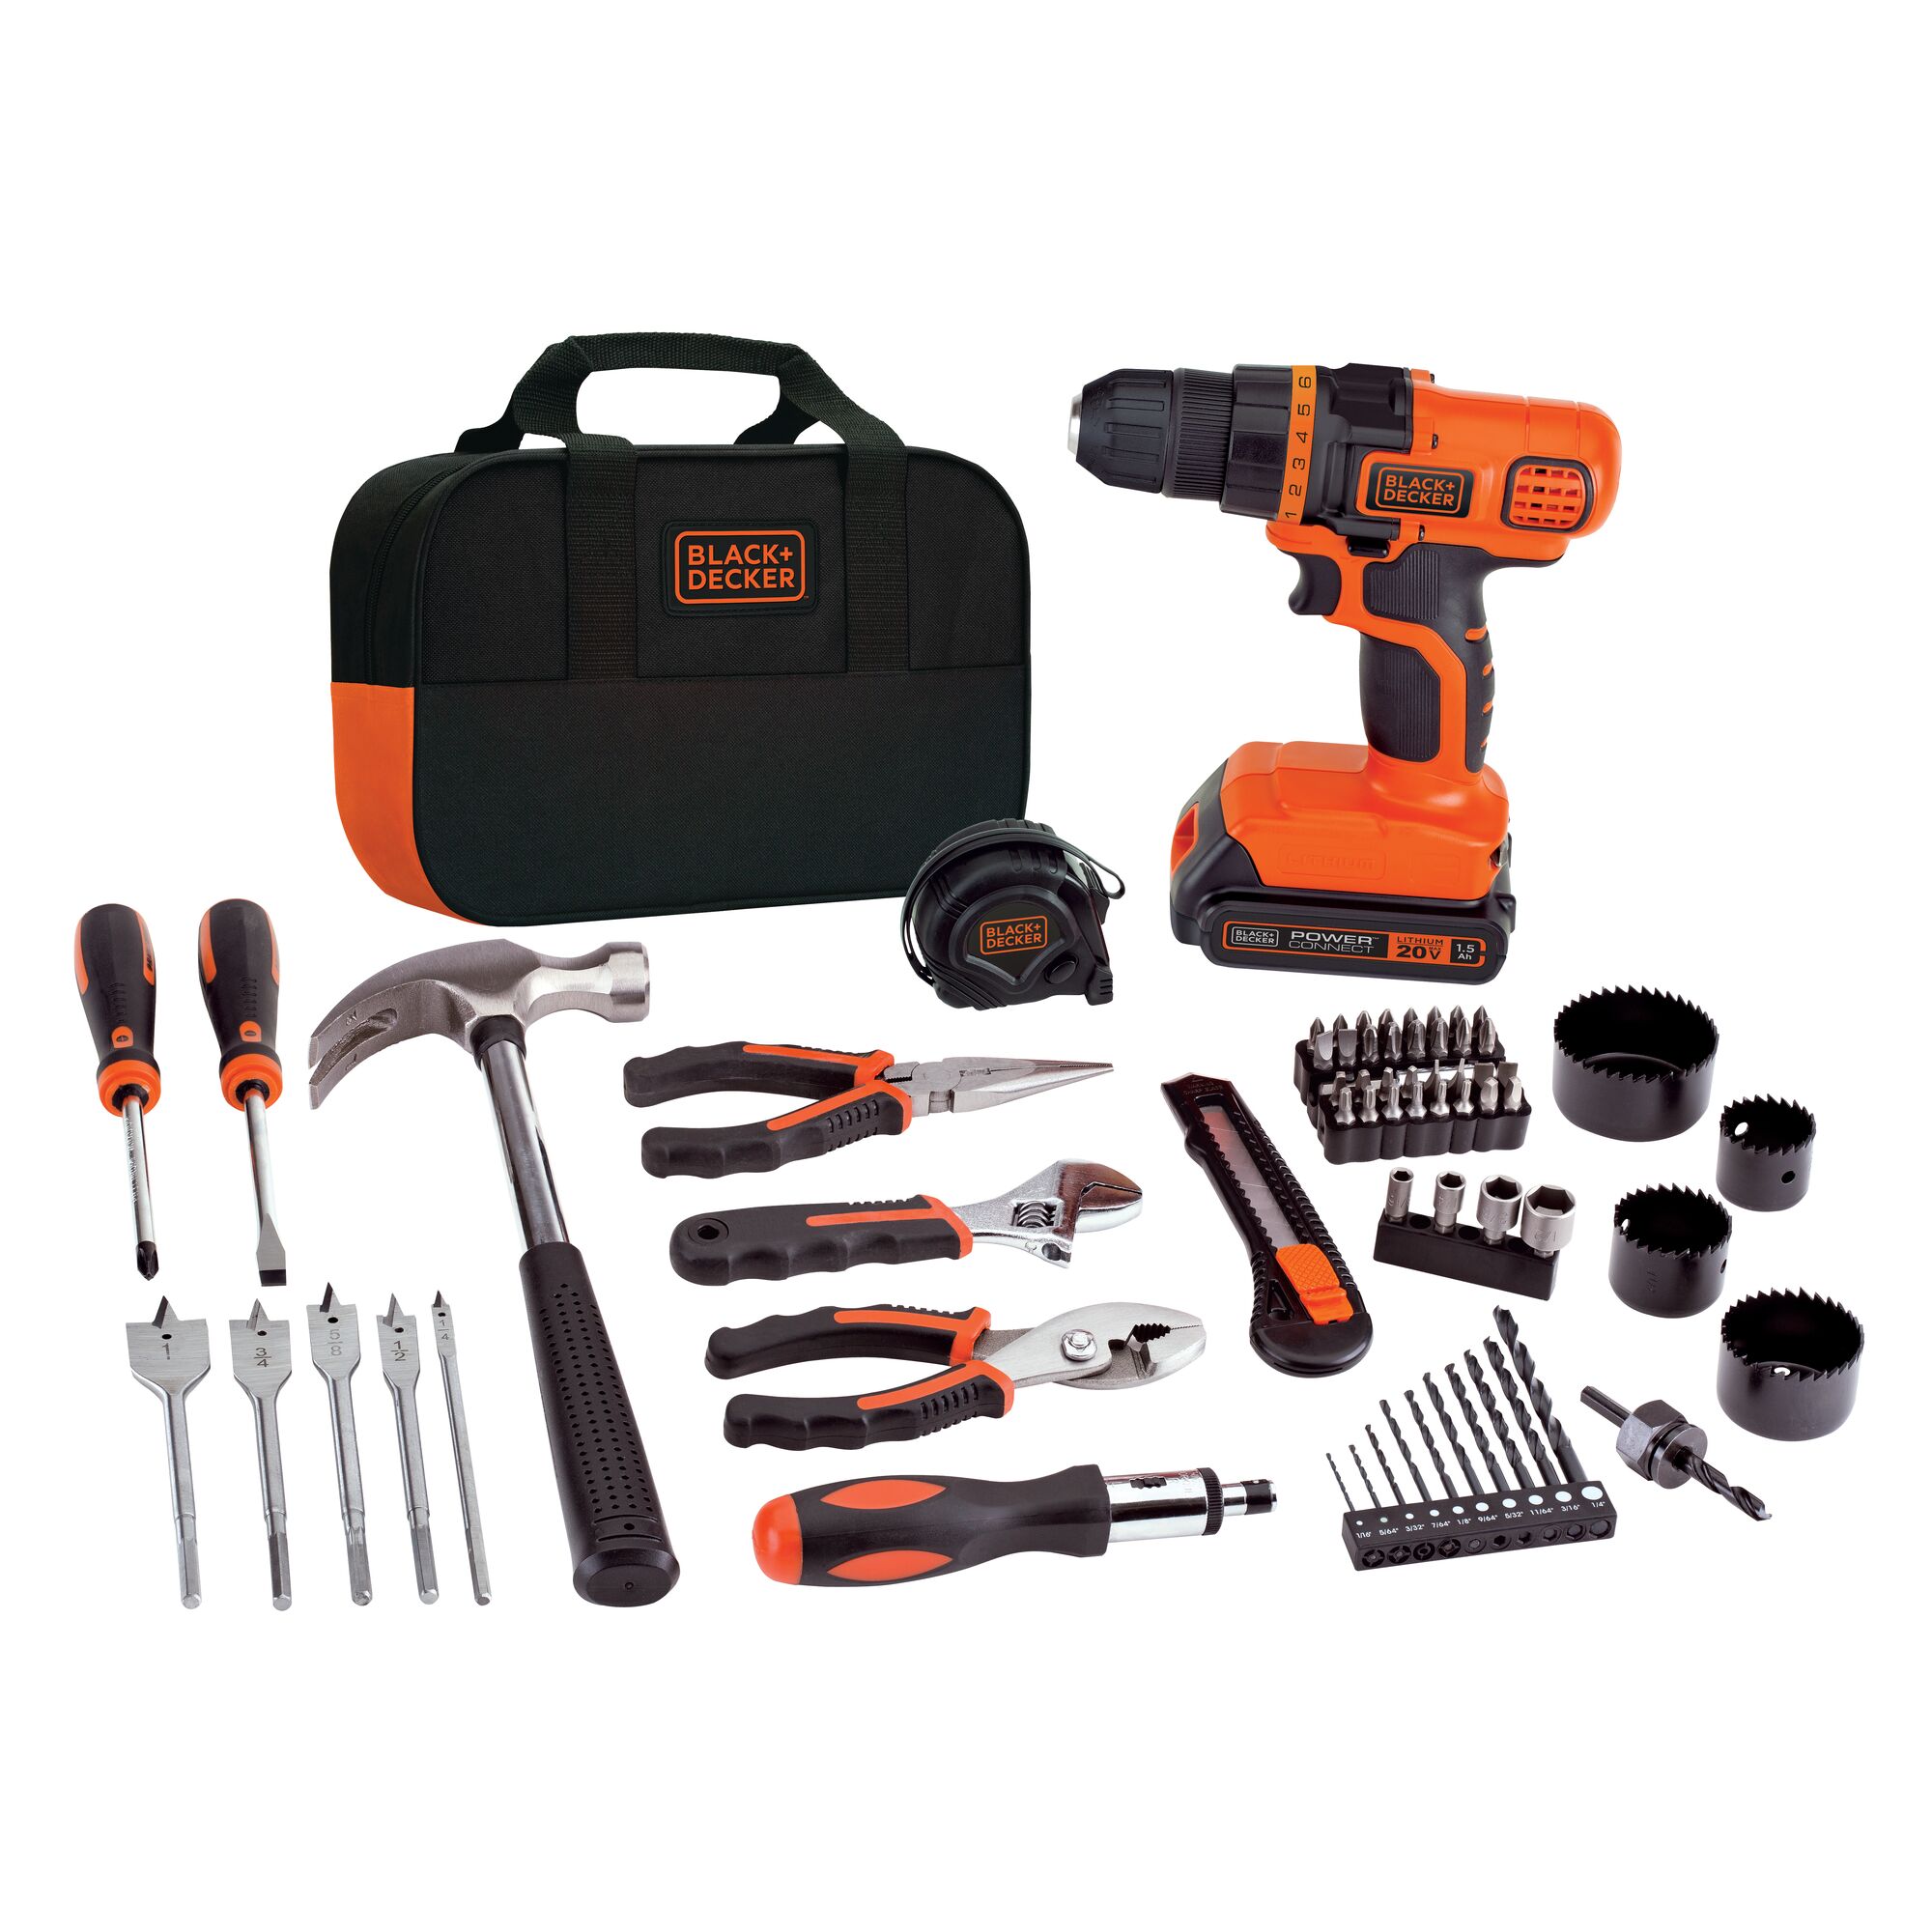 Lithium ion drill / driver plus 68 piece project kit.